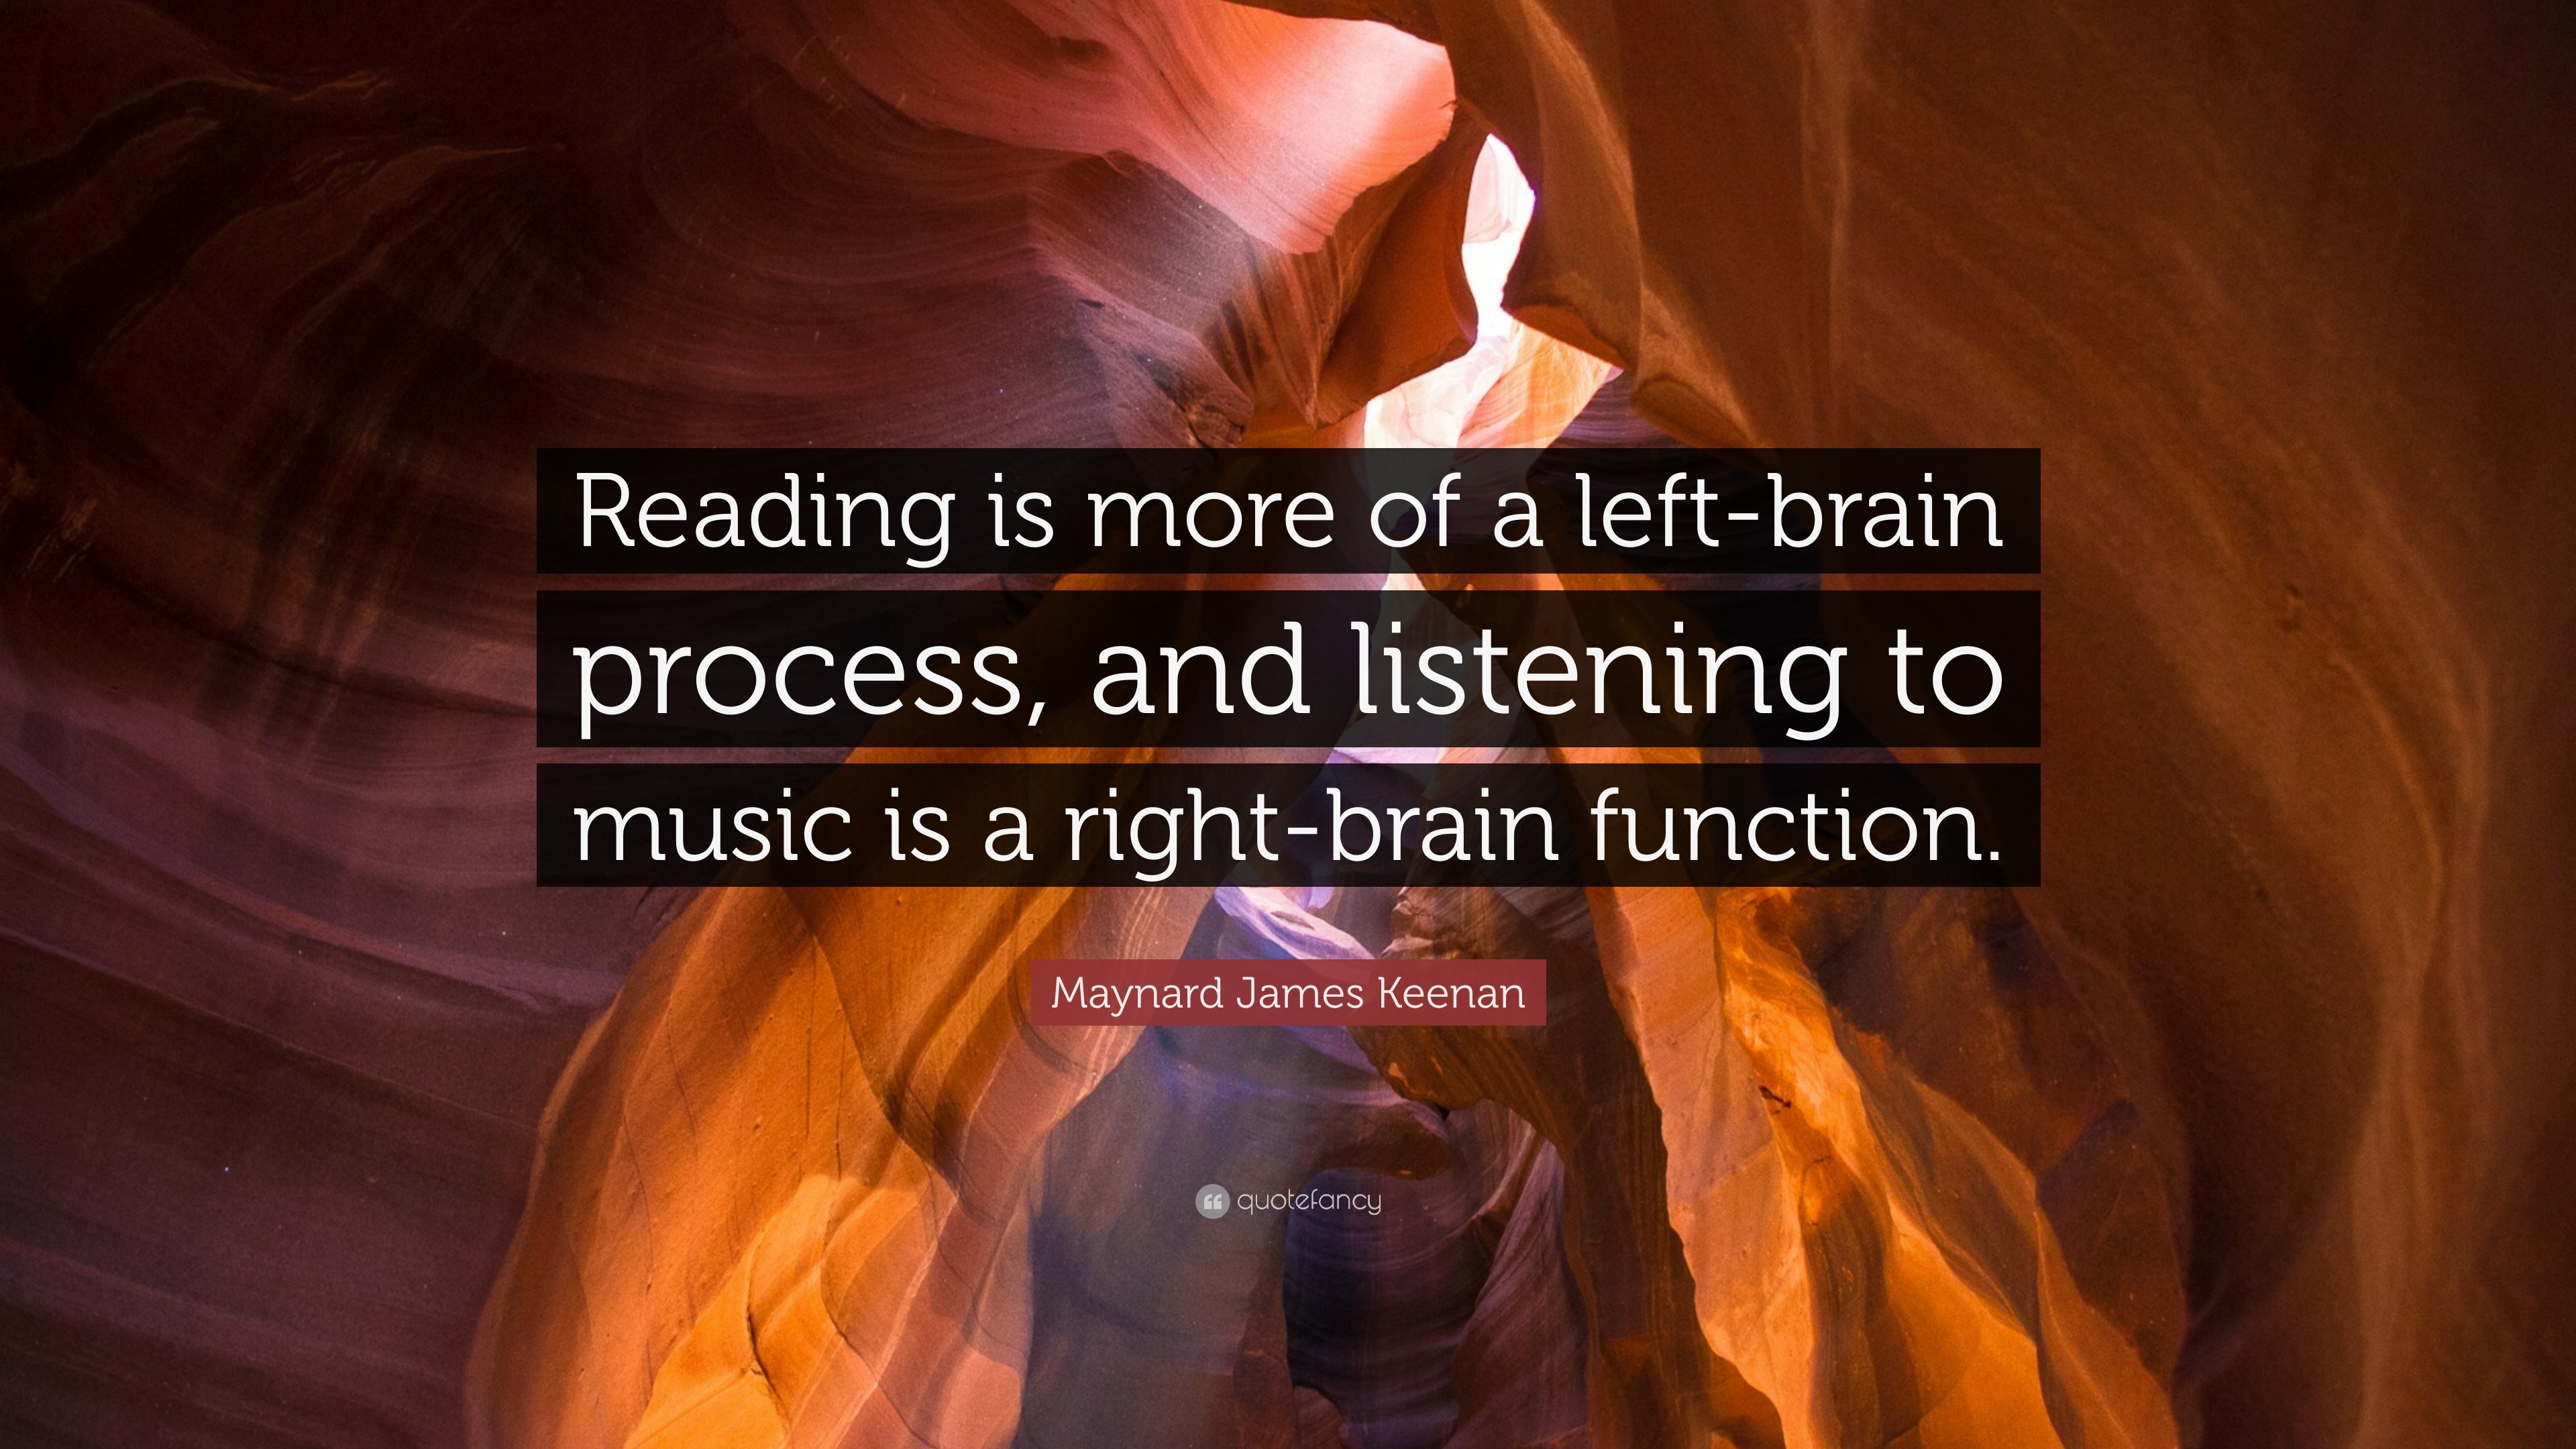 3840x2160 Maynard James Keenan Quote: “Reading is more of a left-brain process,